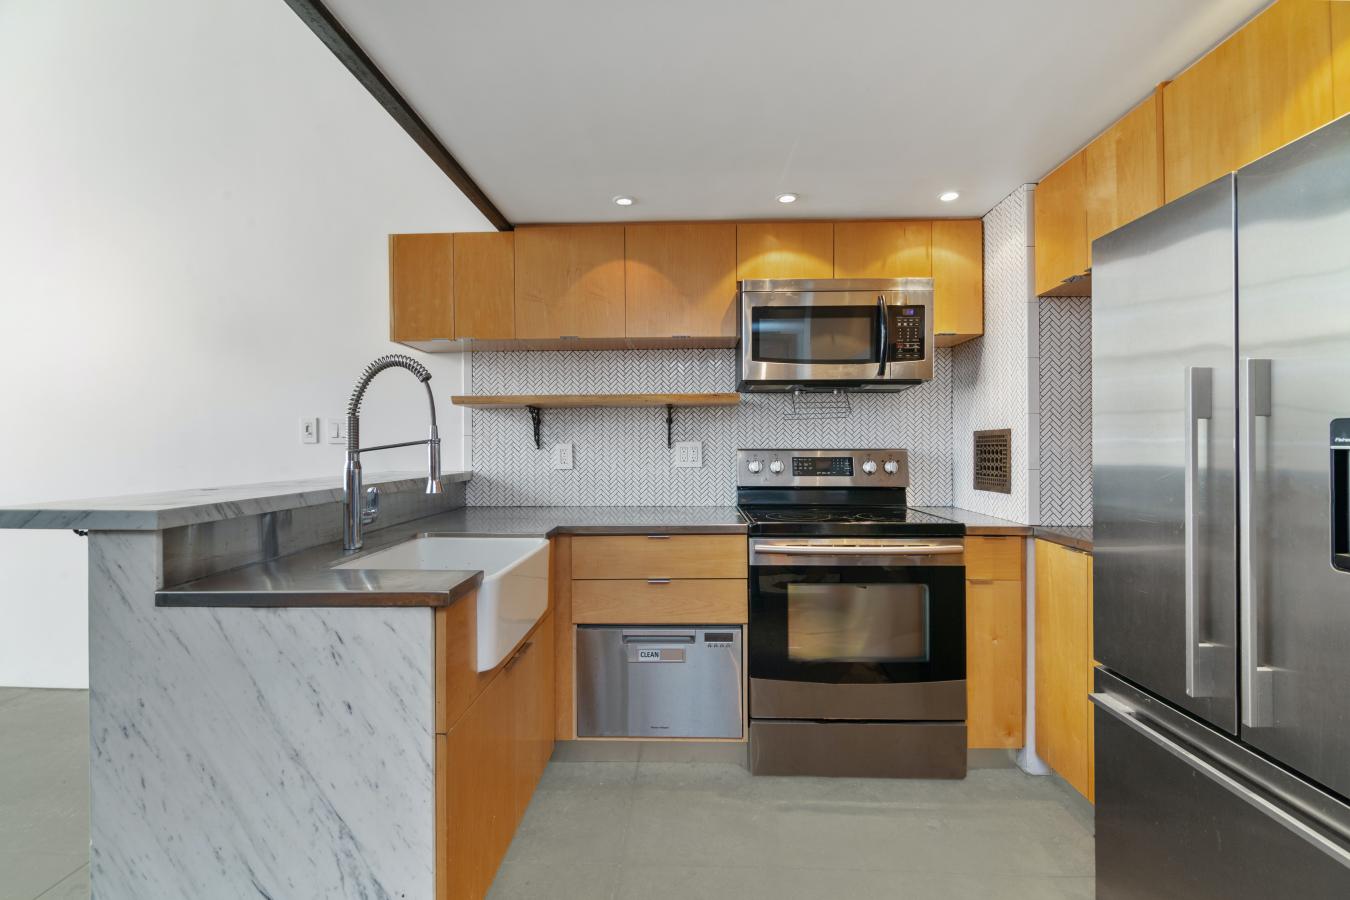 111 Fourth Avenue, Greenwich Village, New York, 10003, United States, 1 Bedroom Bedrooms, ,1 BathroomBathrooms,Residential,For Sale,111 Fourth Avenue,1484577